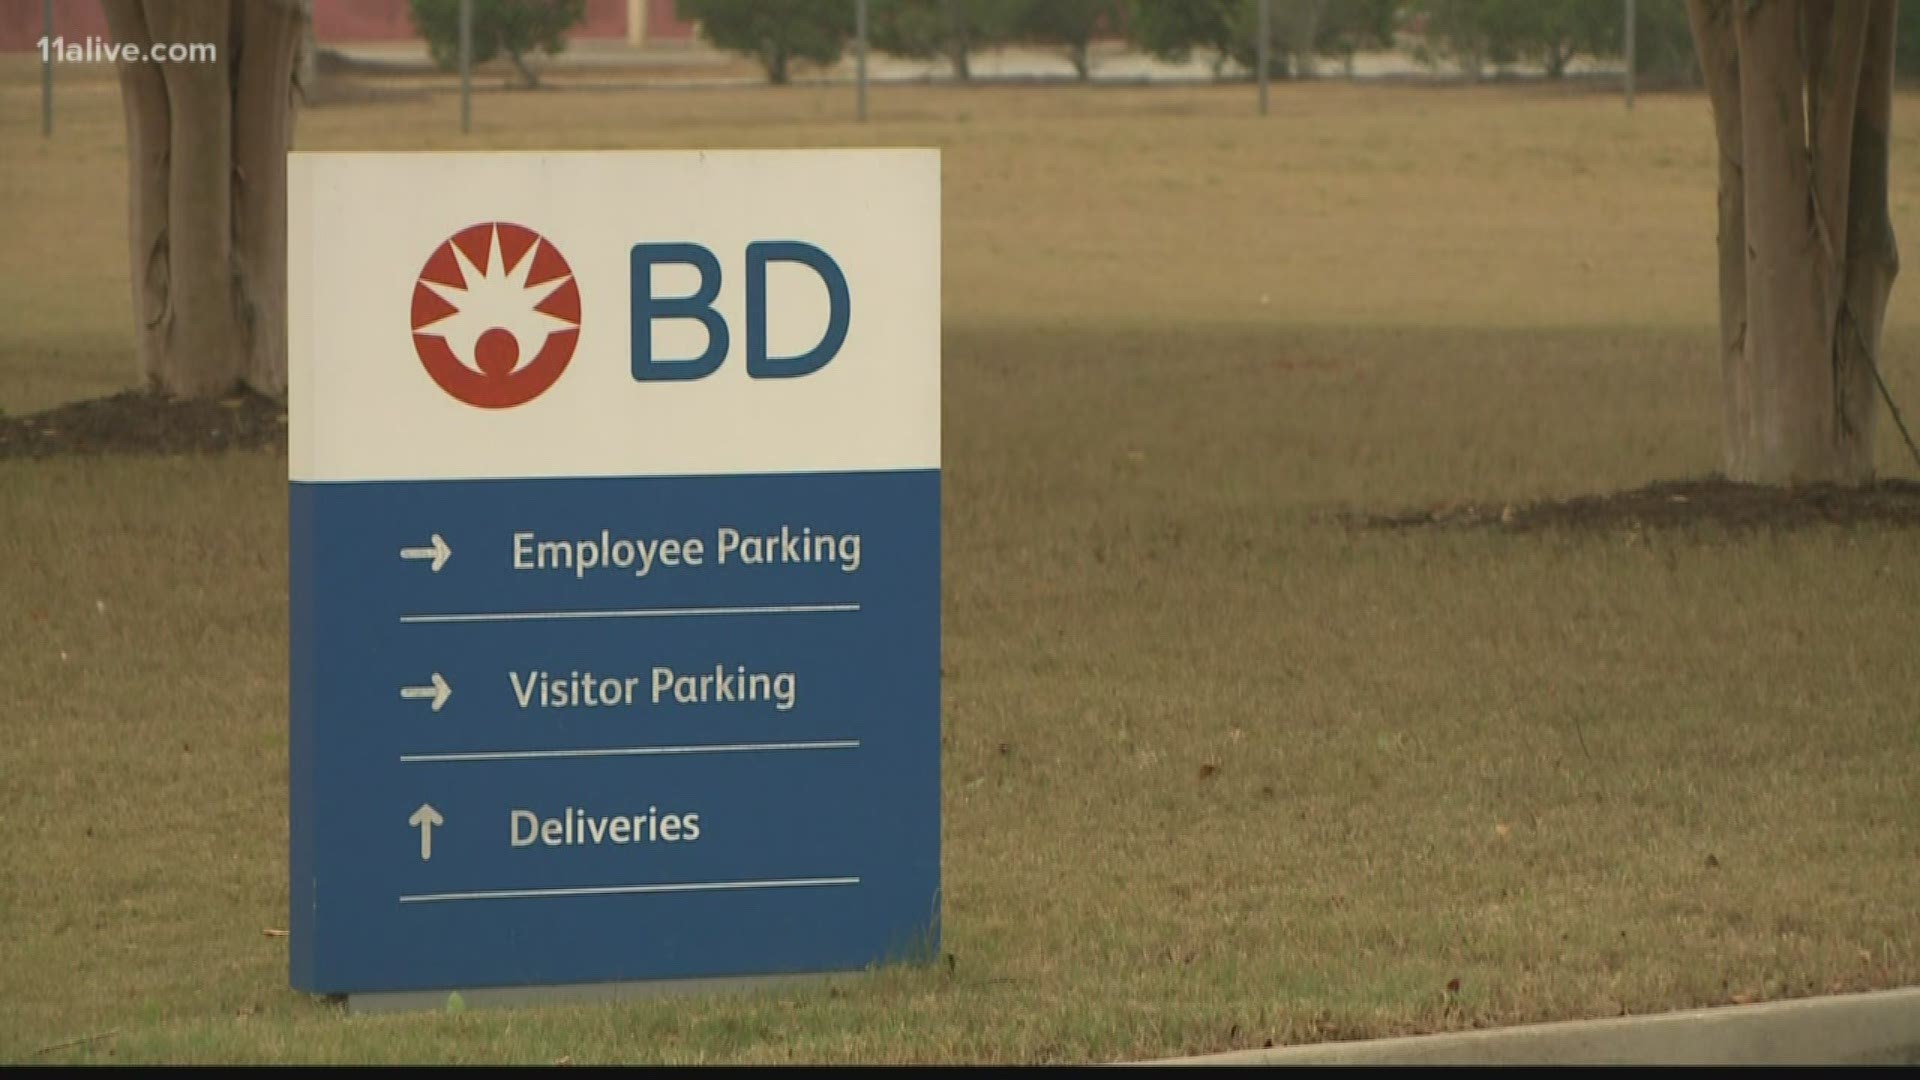 The EPD wants to close the Covington BD plant due to its release of ethylene oxide.